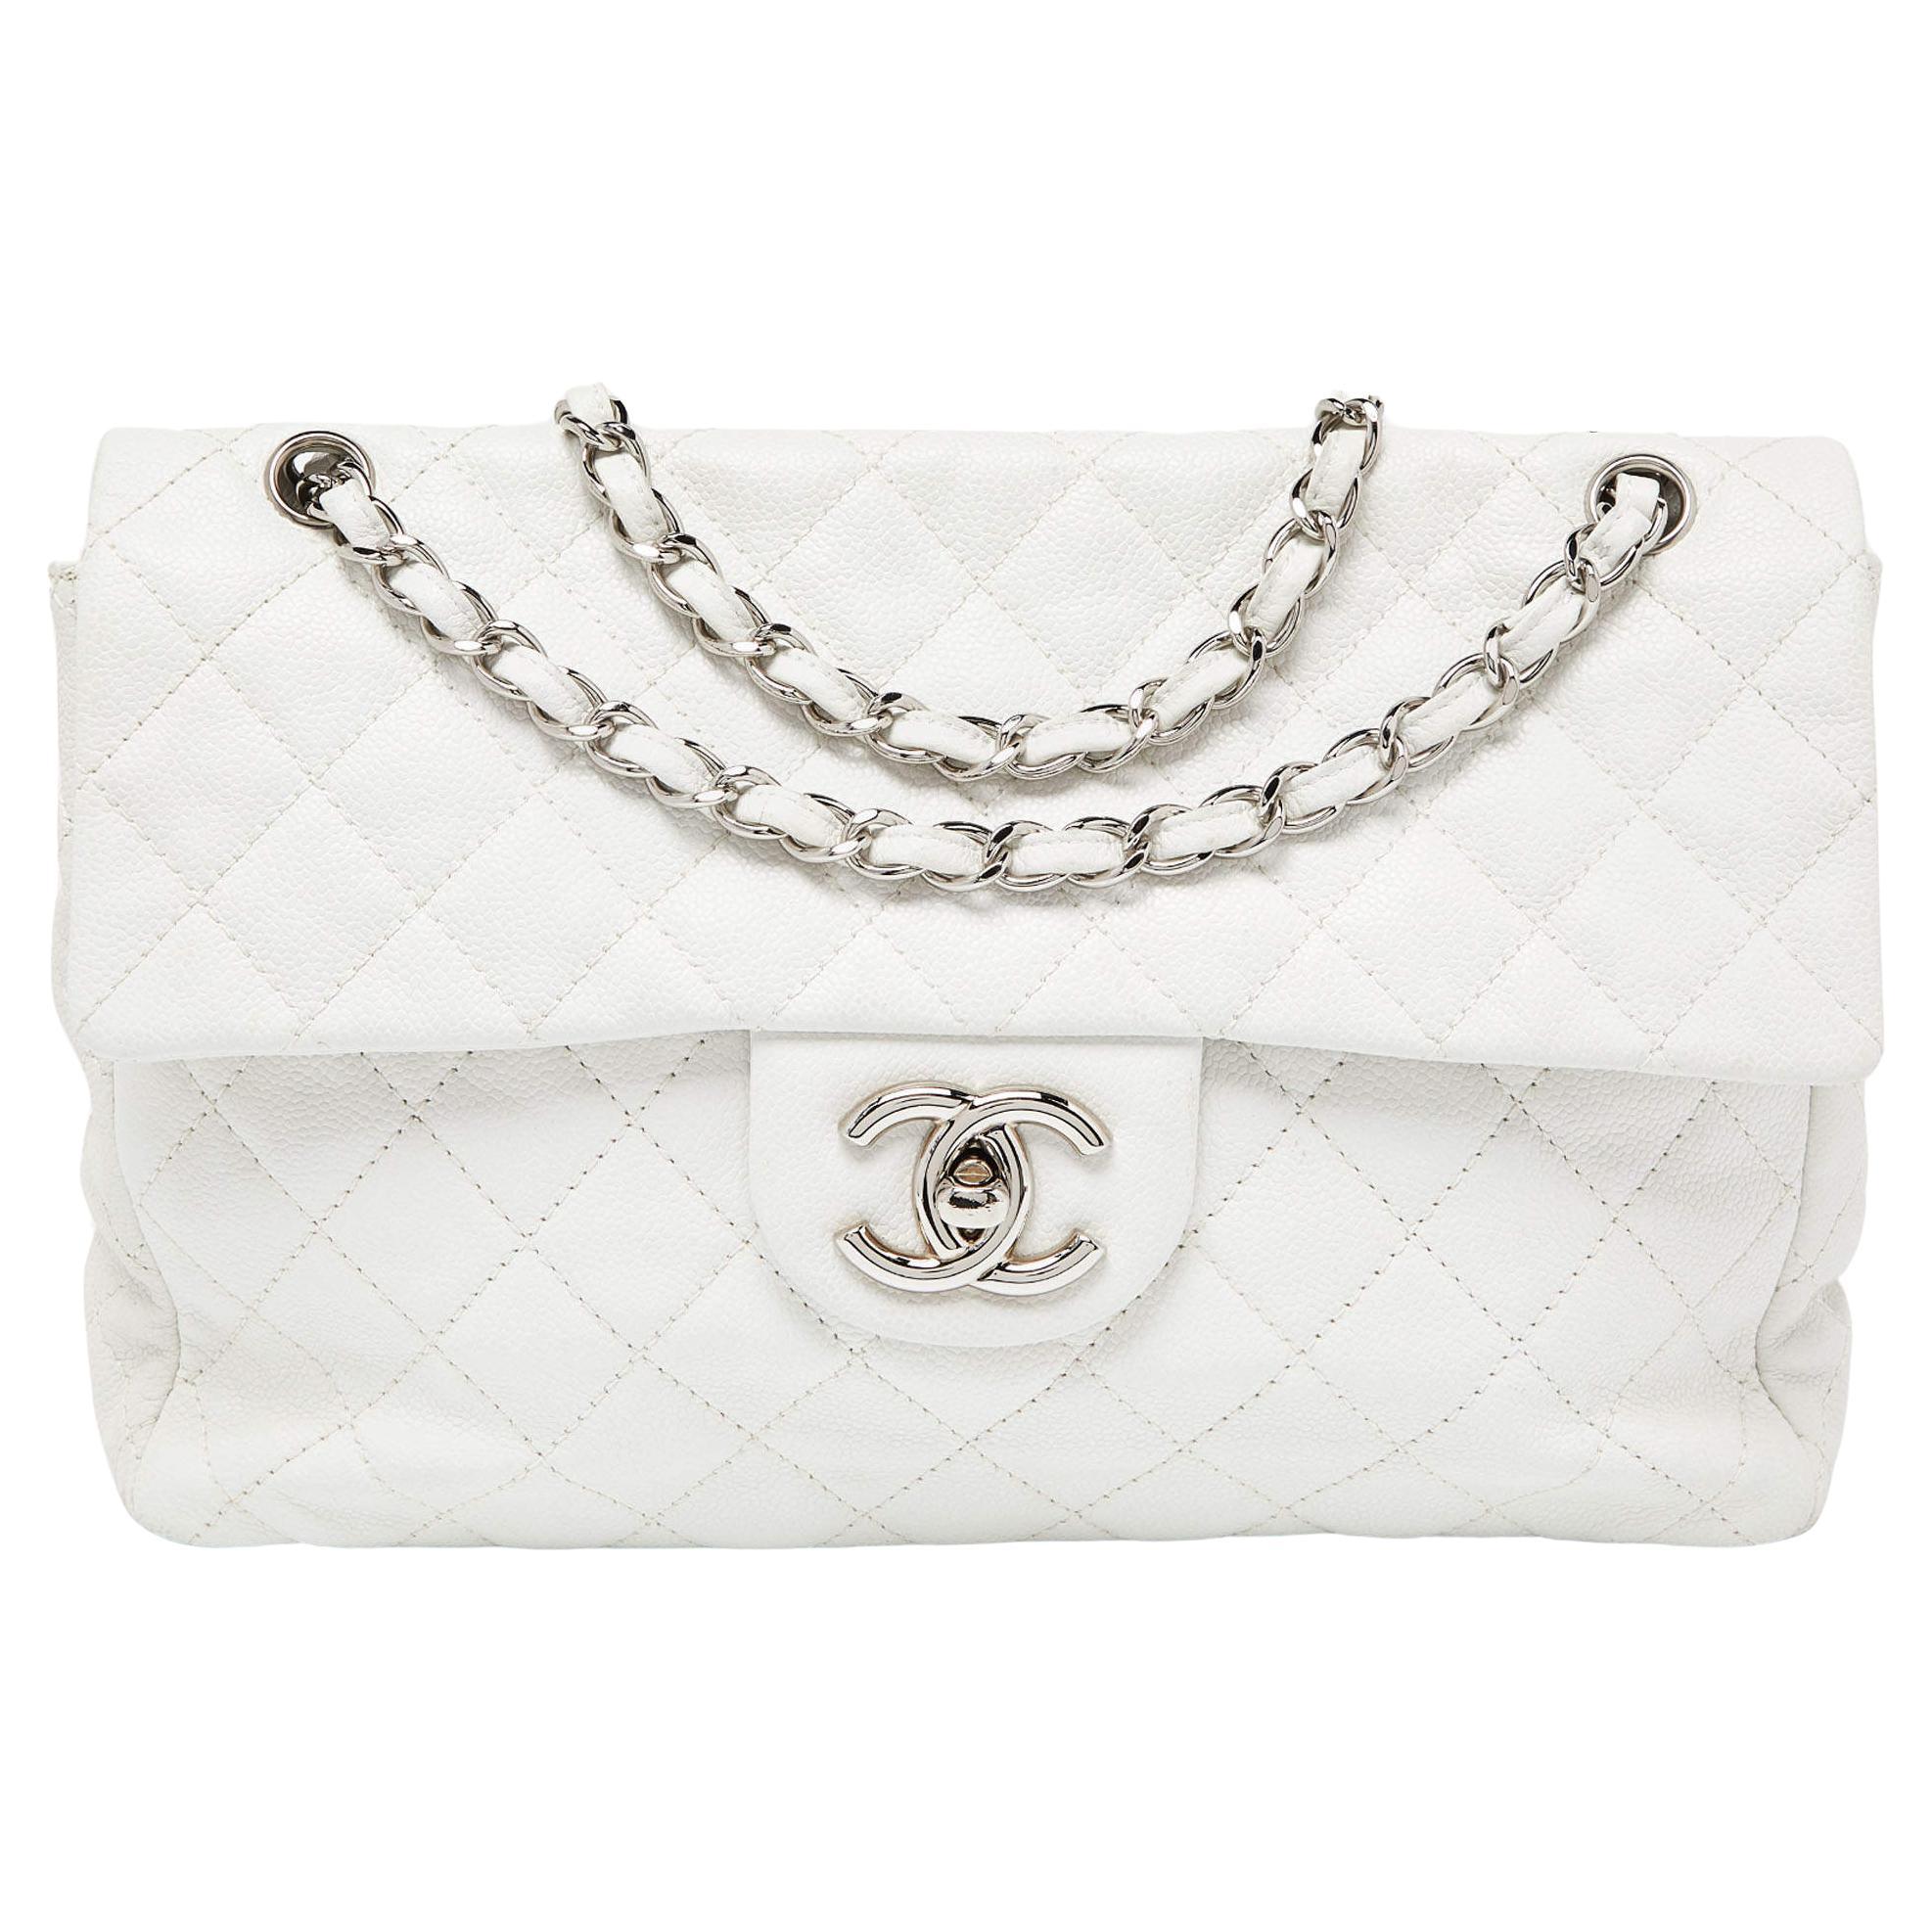 Chanel White Quilted Caviar Leather Maxi Vintage Classic Single Flap Bag For Sale